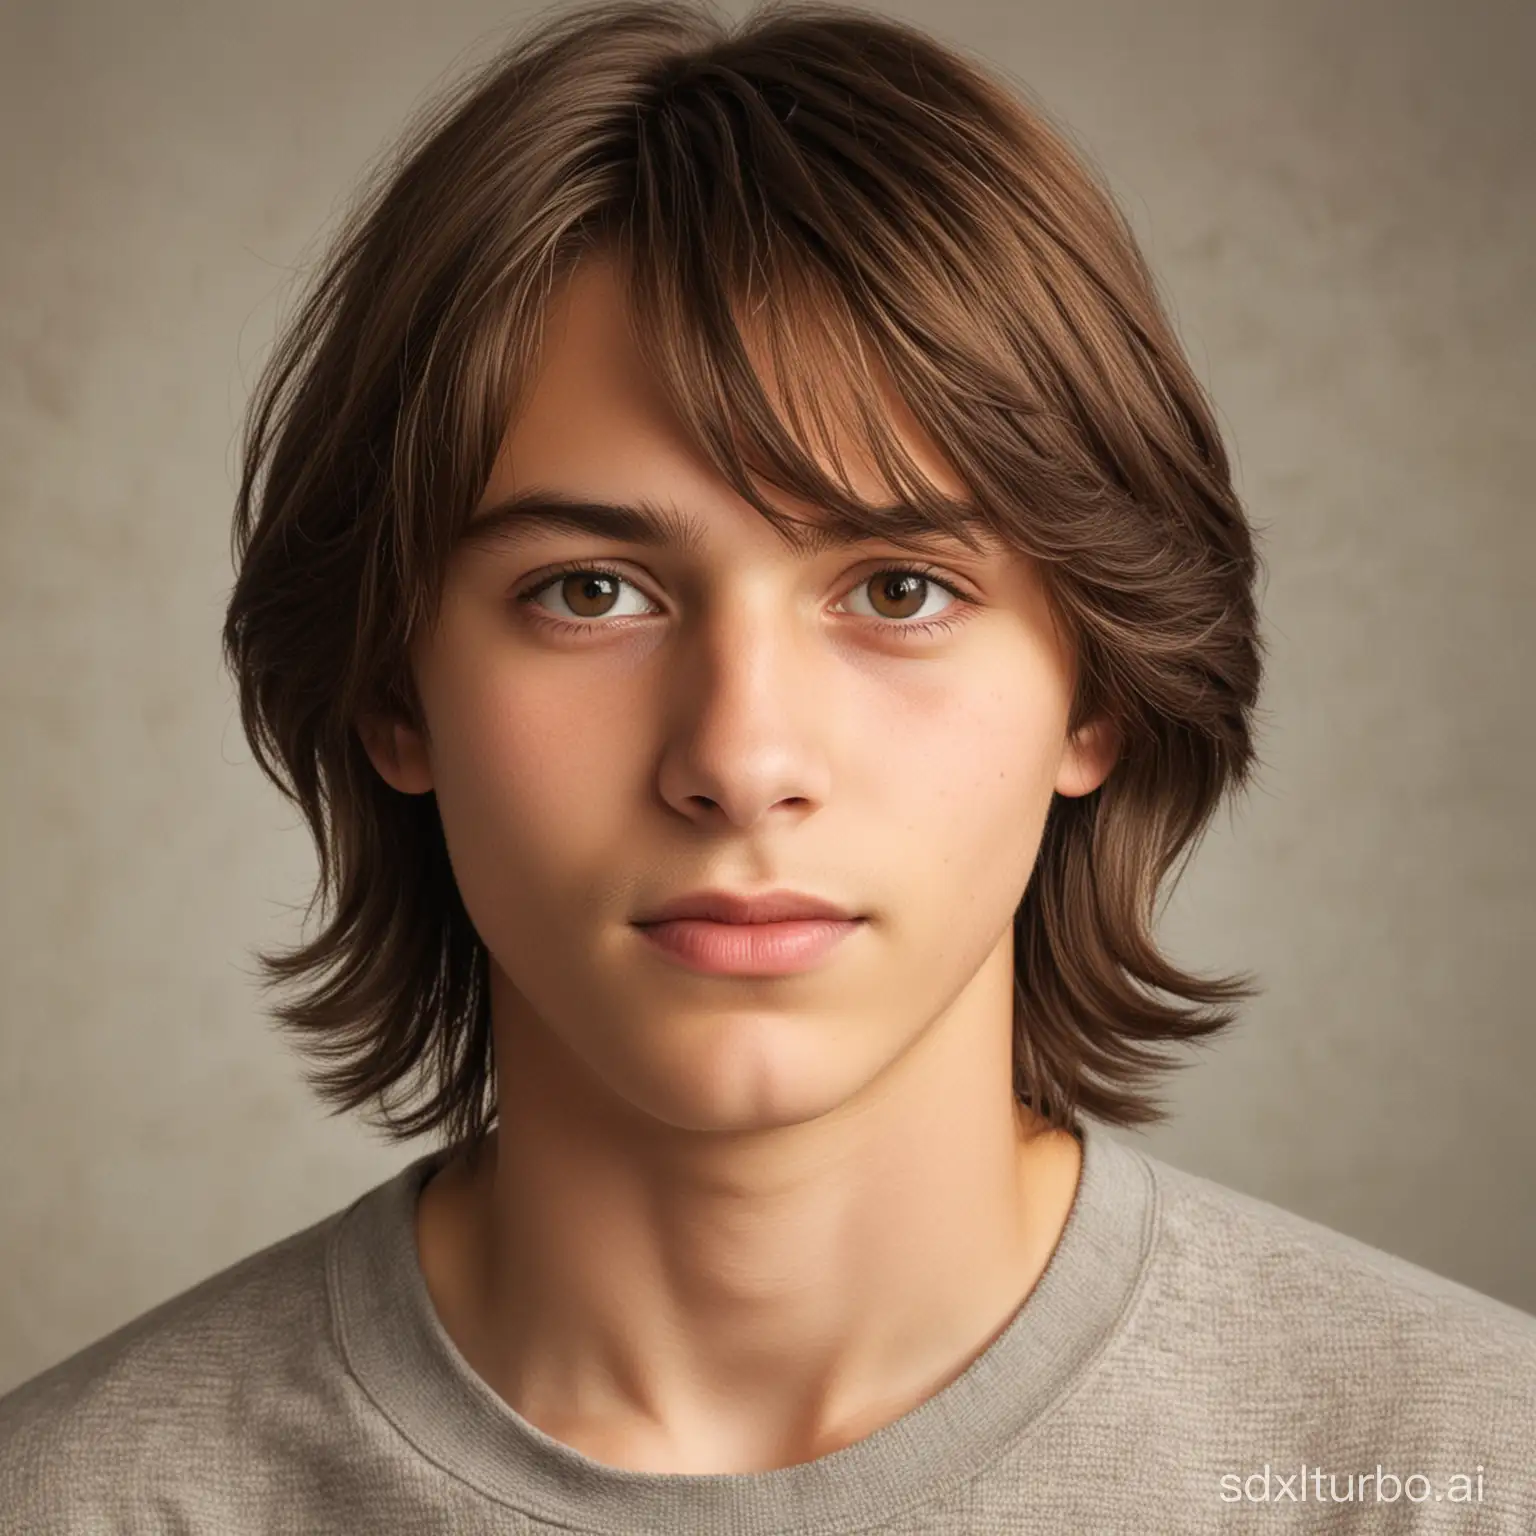 Portrait-of-Arvid-Flodn-Teenage-Boy-with-Brown-Hair-and-Eyes